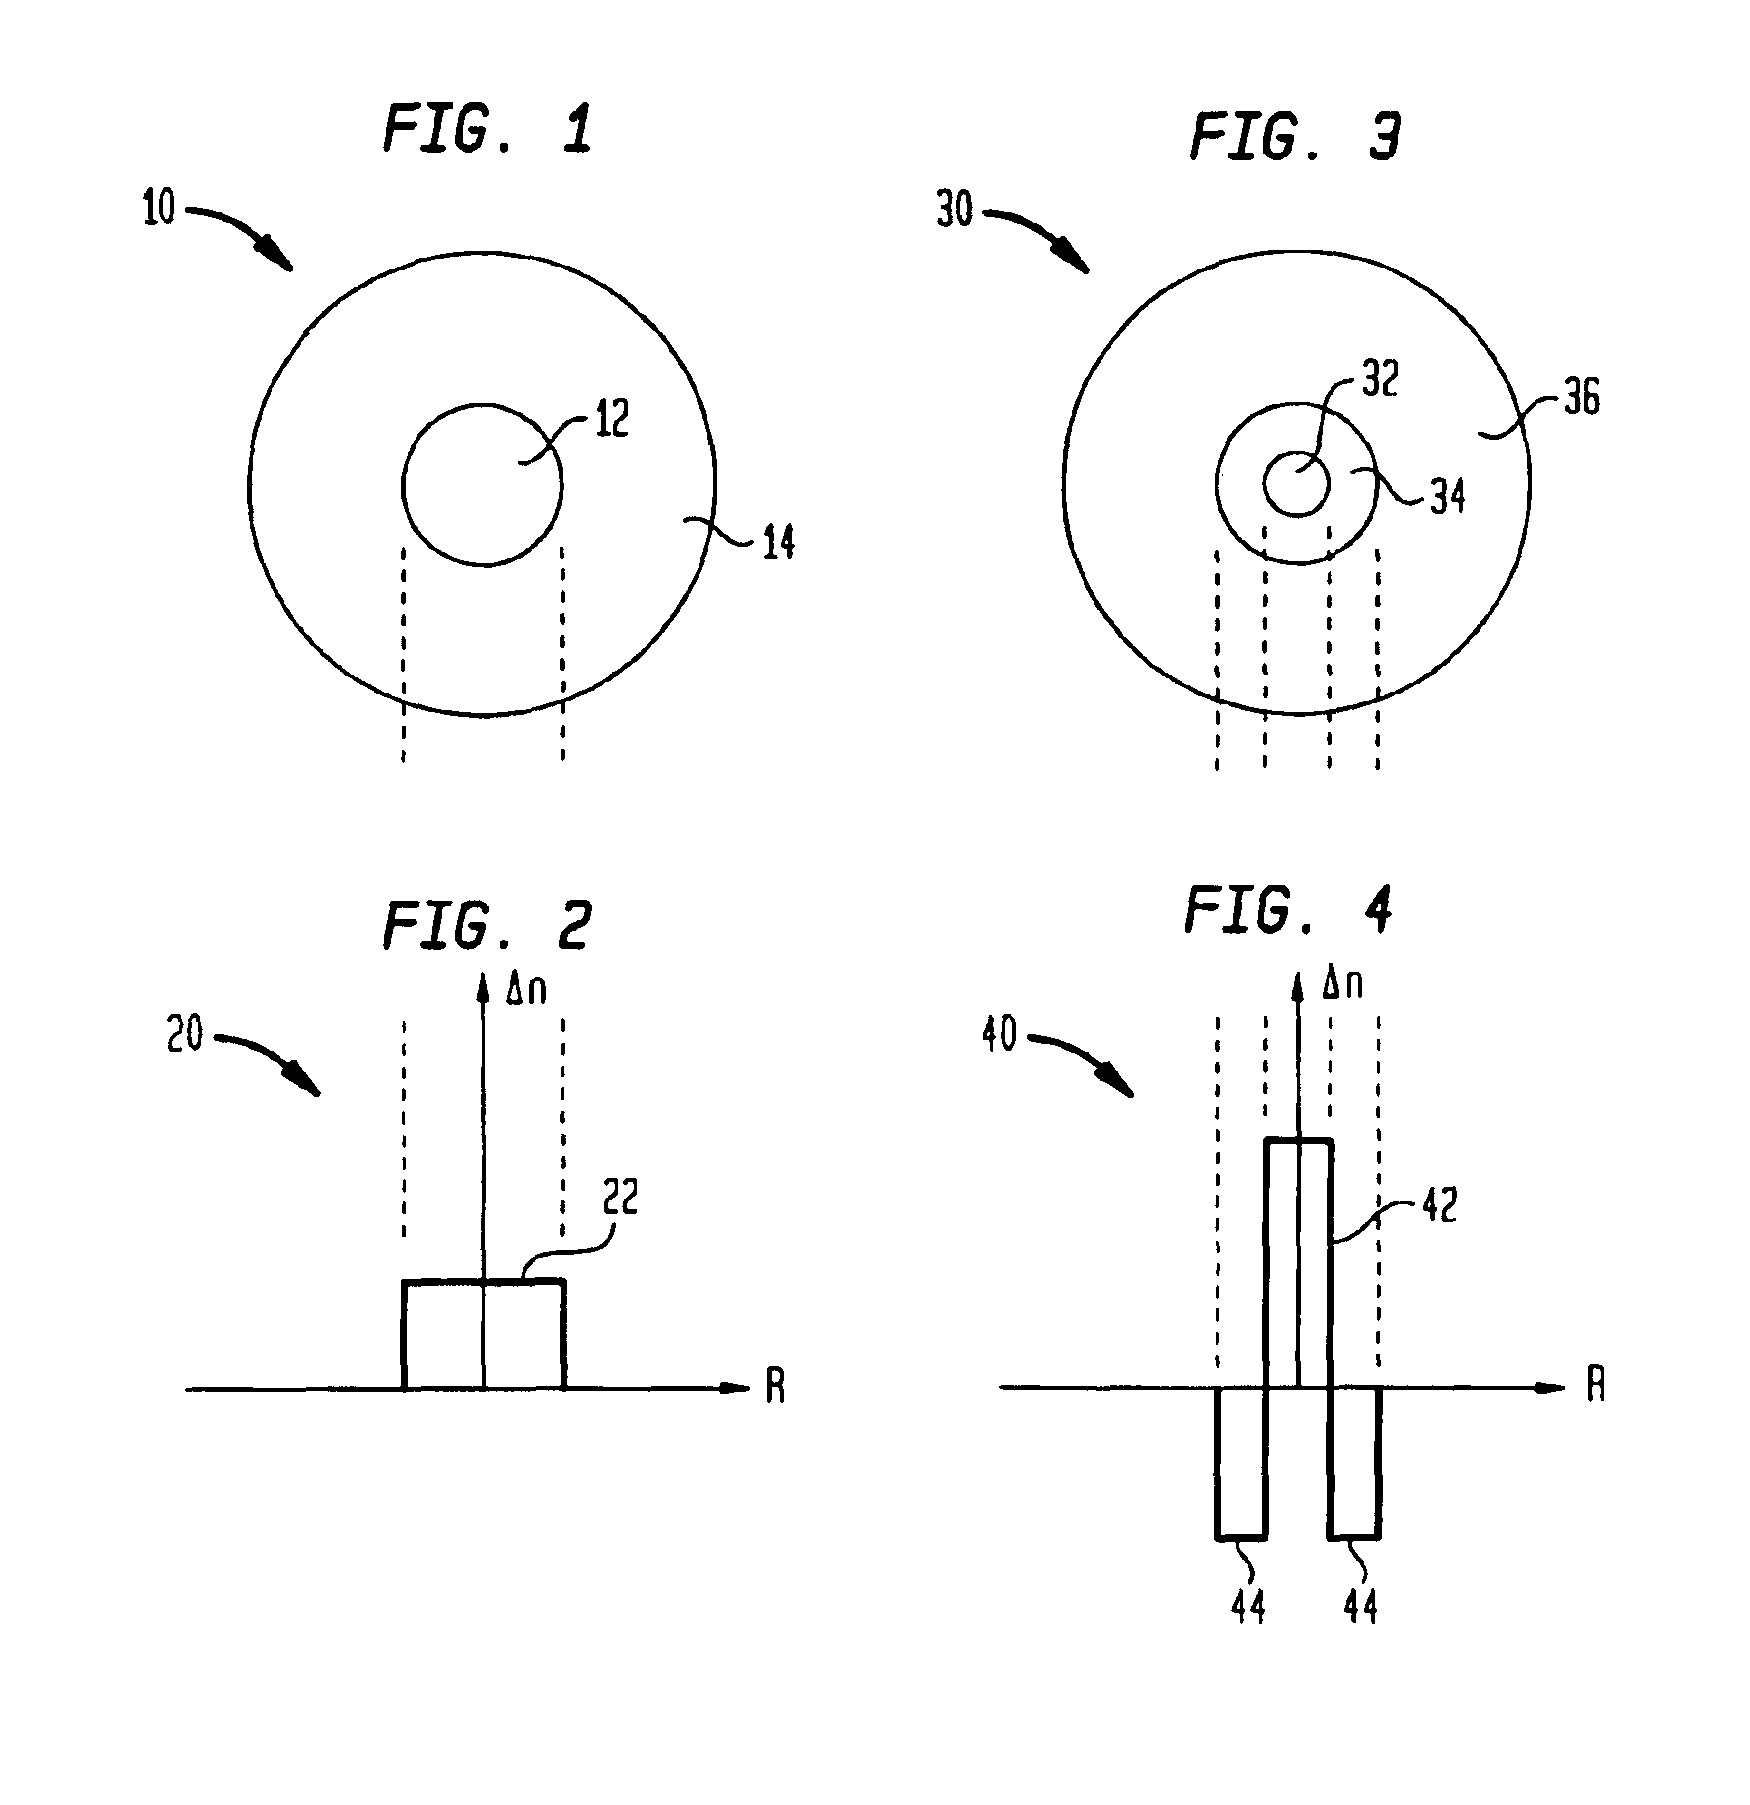 Systems and methods for fabricating low-loss, high-strength optical fiber transmission lines